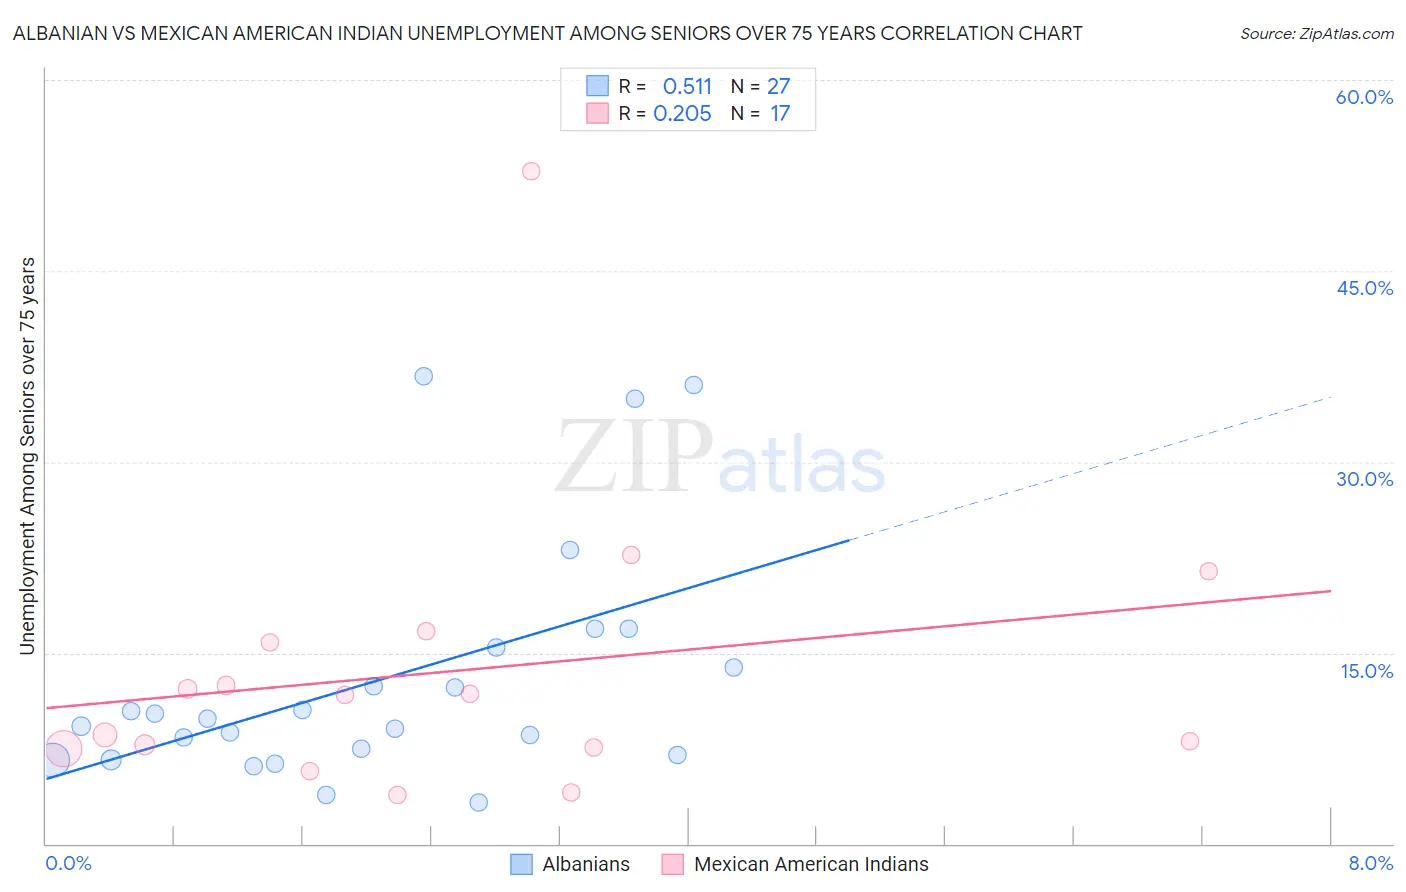 Albanian vs Mexican American Indian Unemployment Among Seniors over 75 years